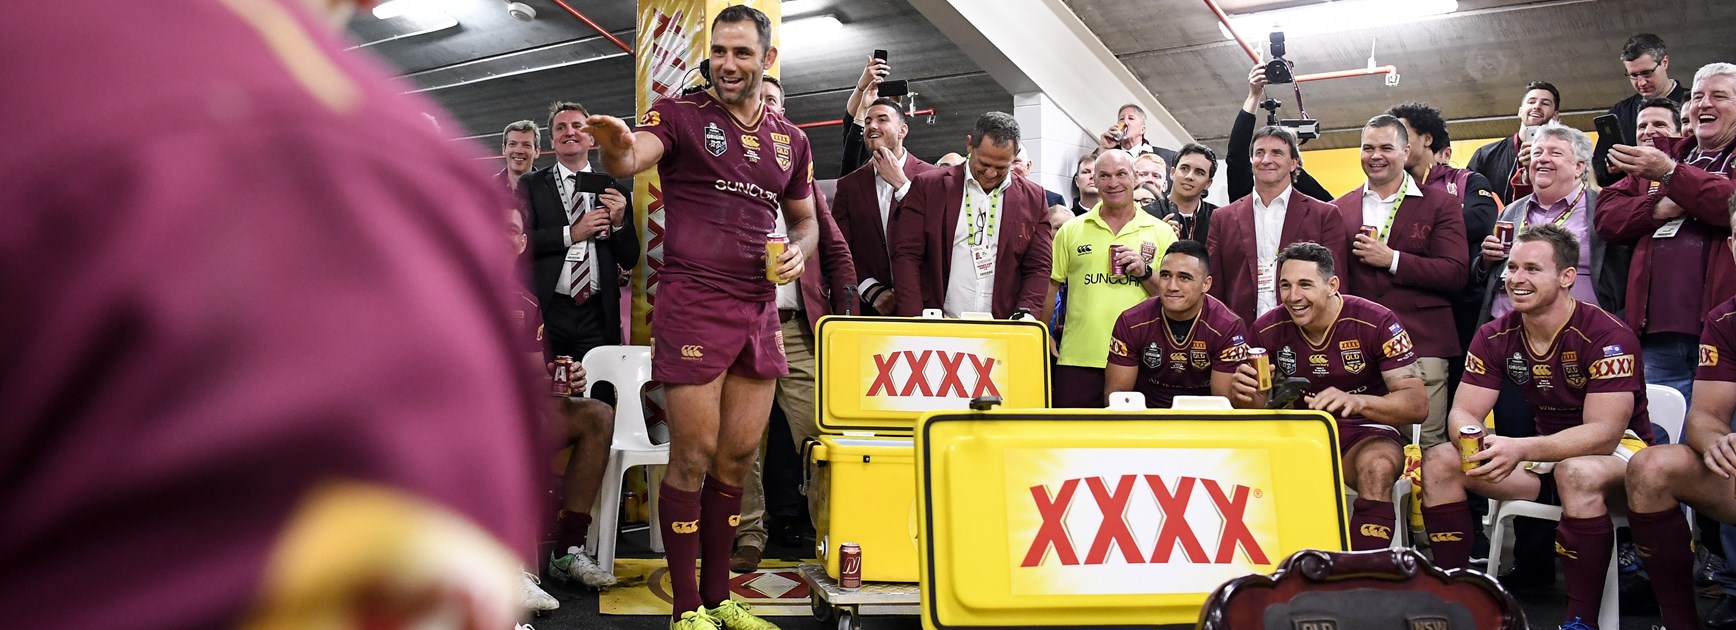 XXXX and the Maroons: it's in our DNA